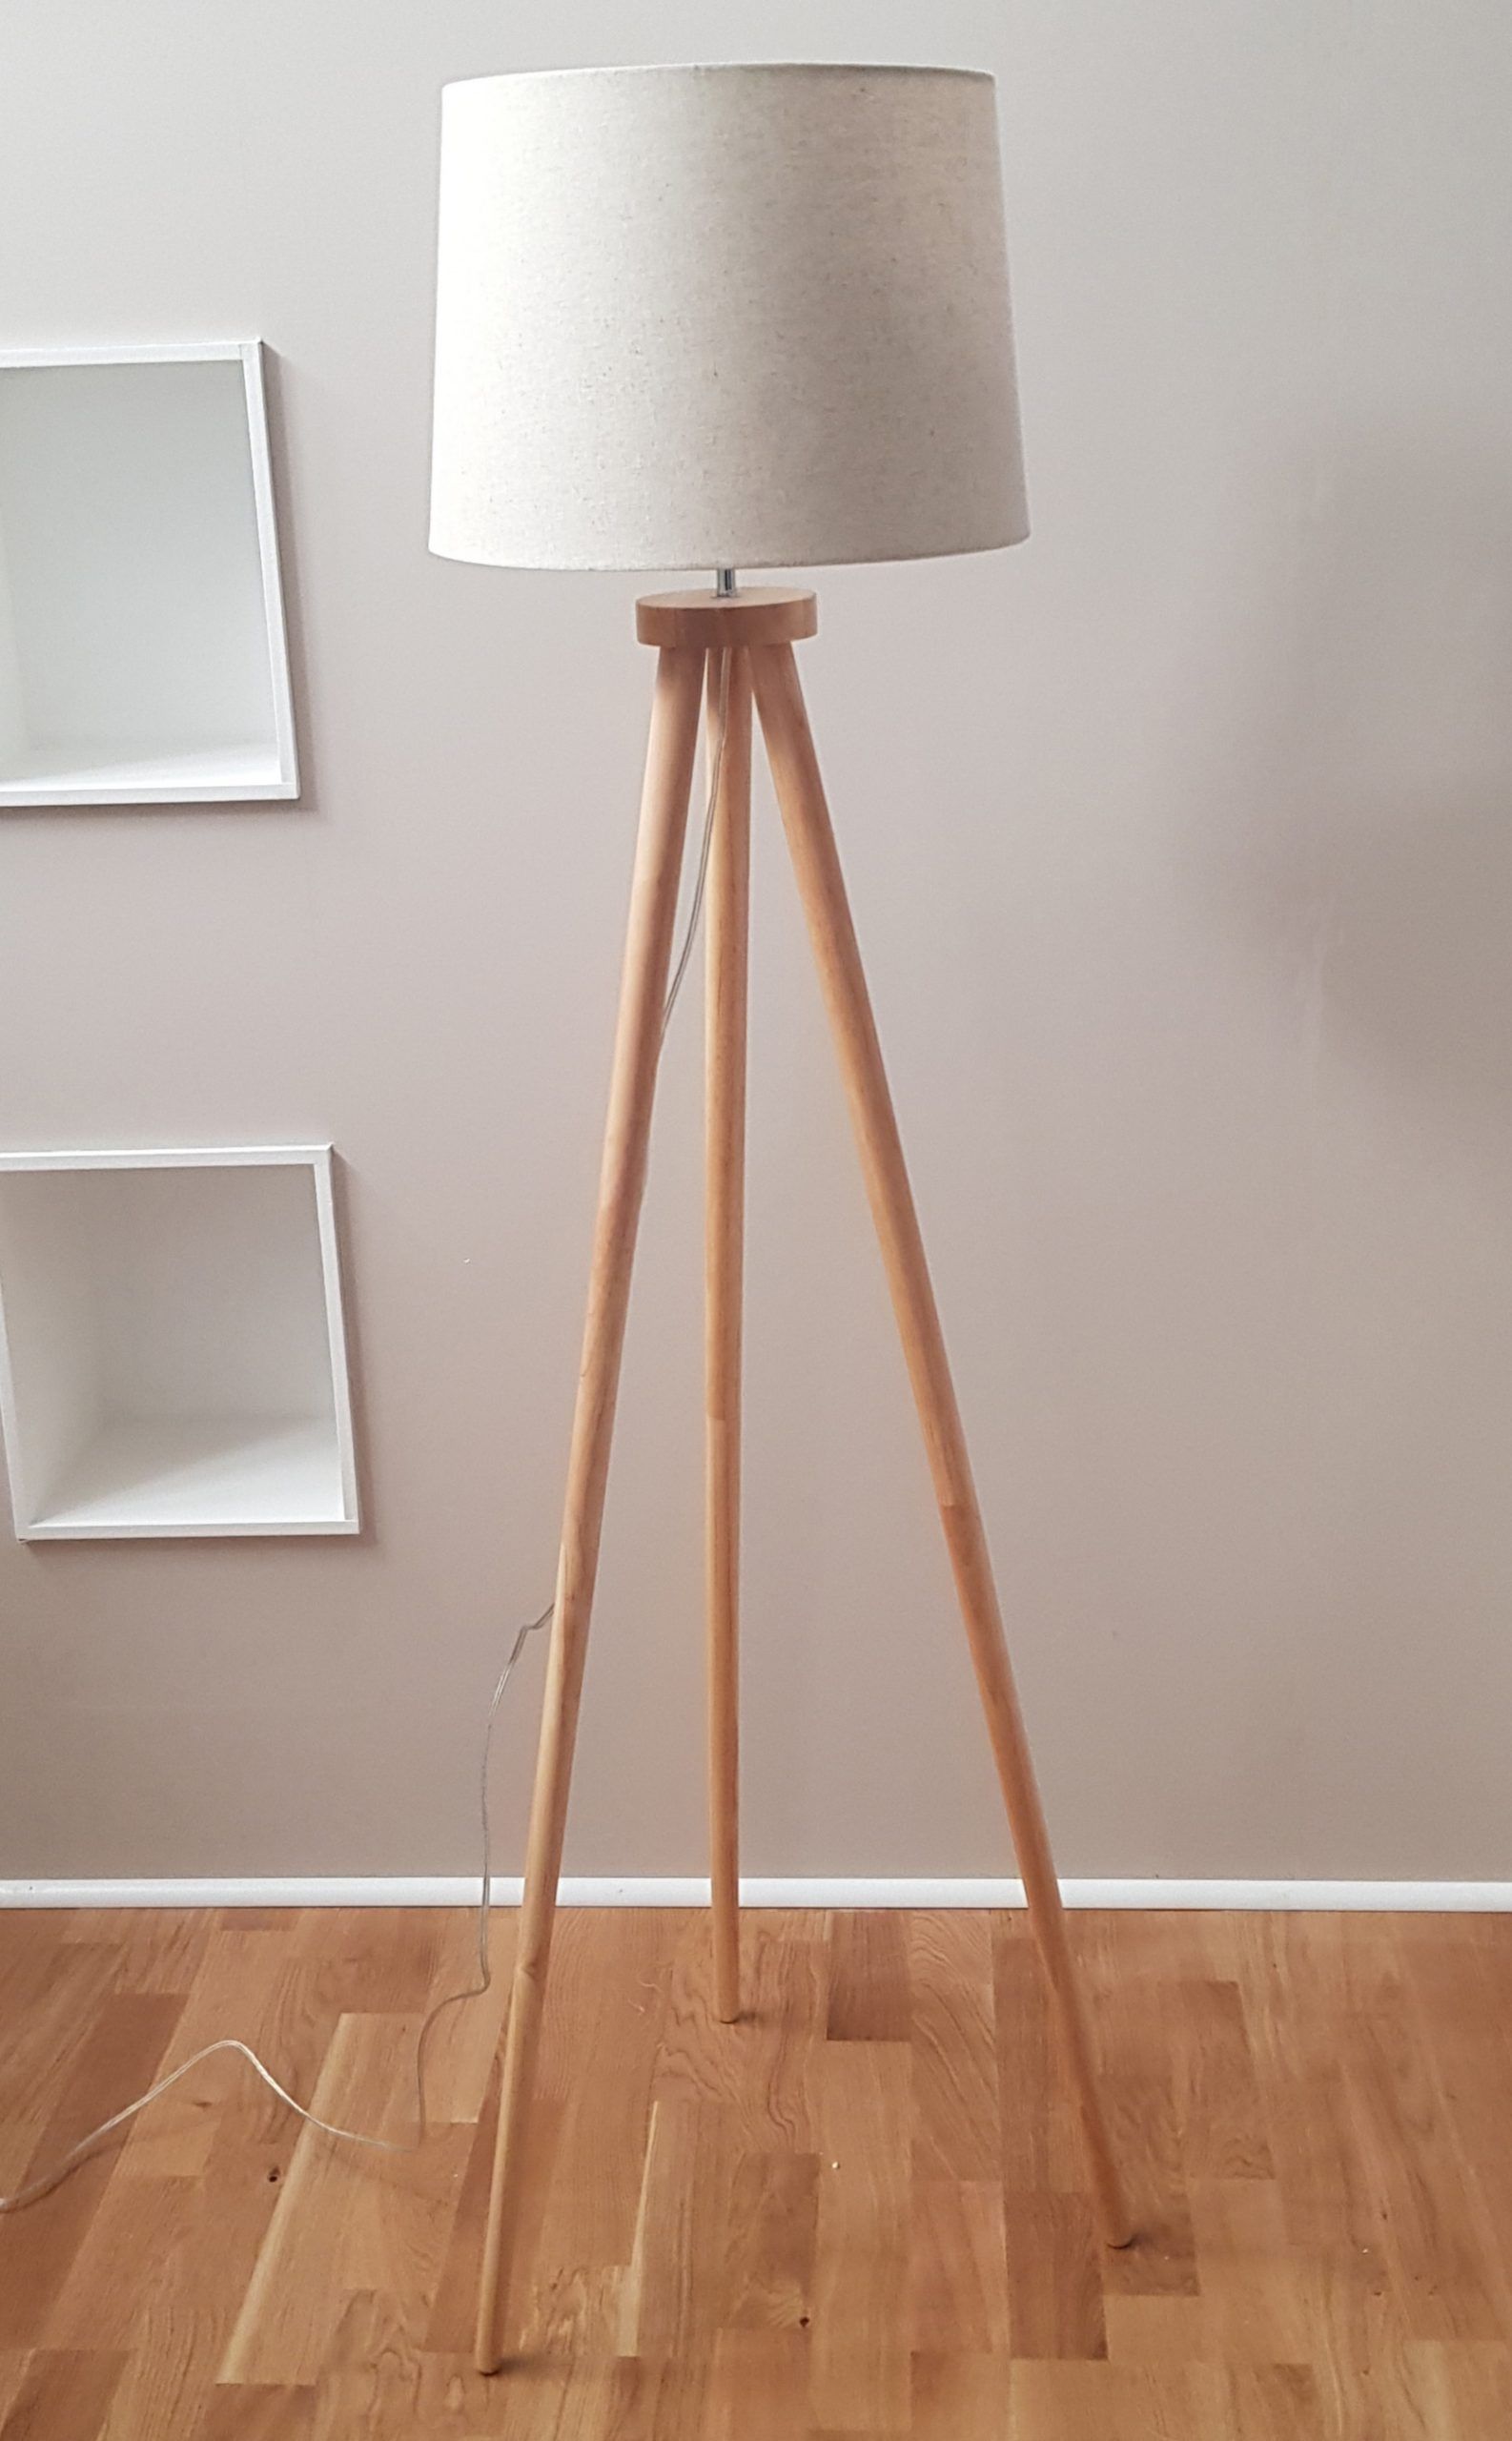 Chadwick Natural Wood Tripod Floor Lamp – Kliving With Regard To Wood Tripod Floor Lamps (View 5 of 15)